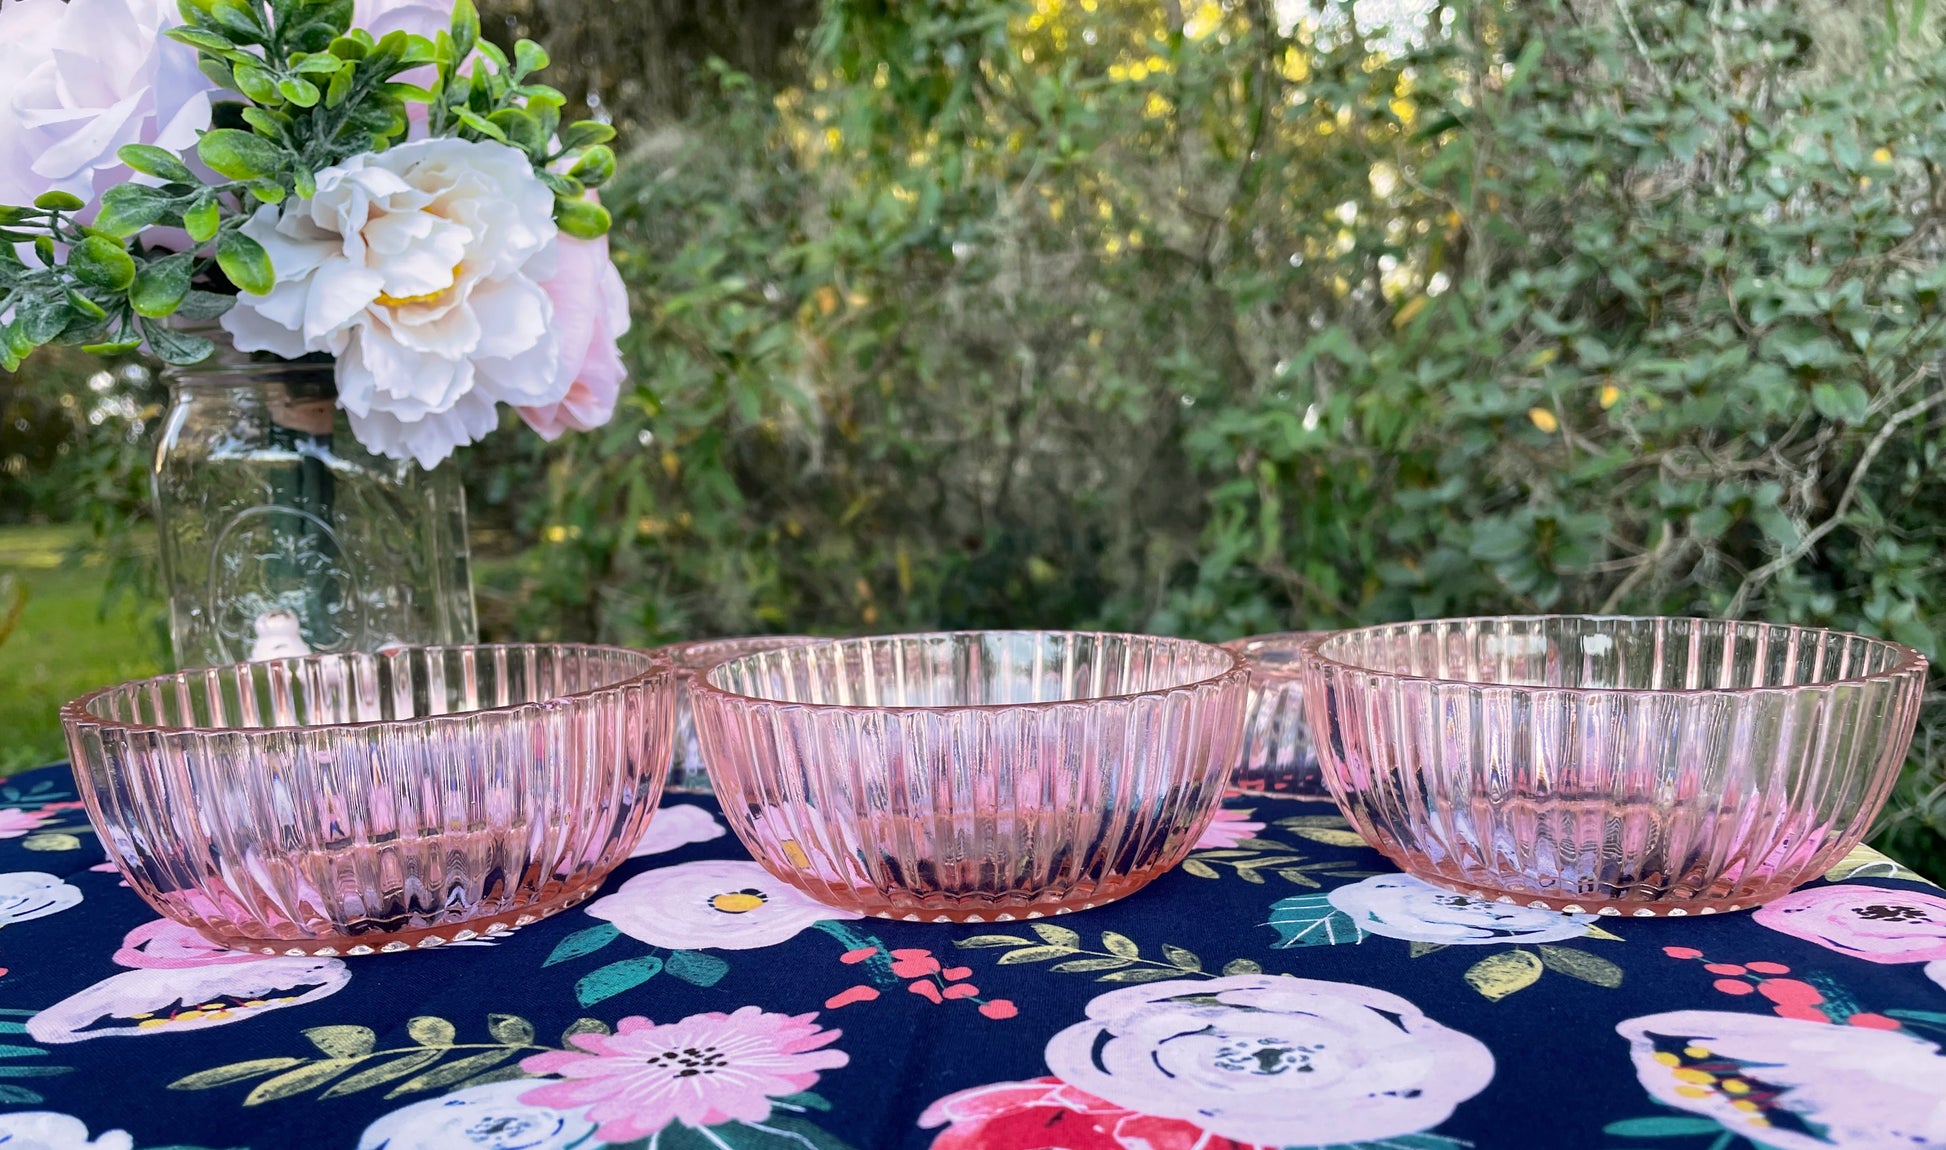 Antique Anchor Queen Set Broken The Bird of Mary 3 Hocking Glass Bowls – Depression Company Pink